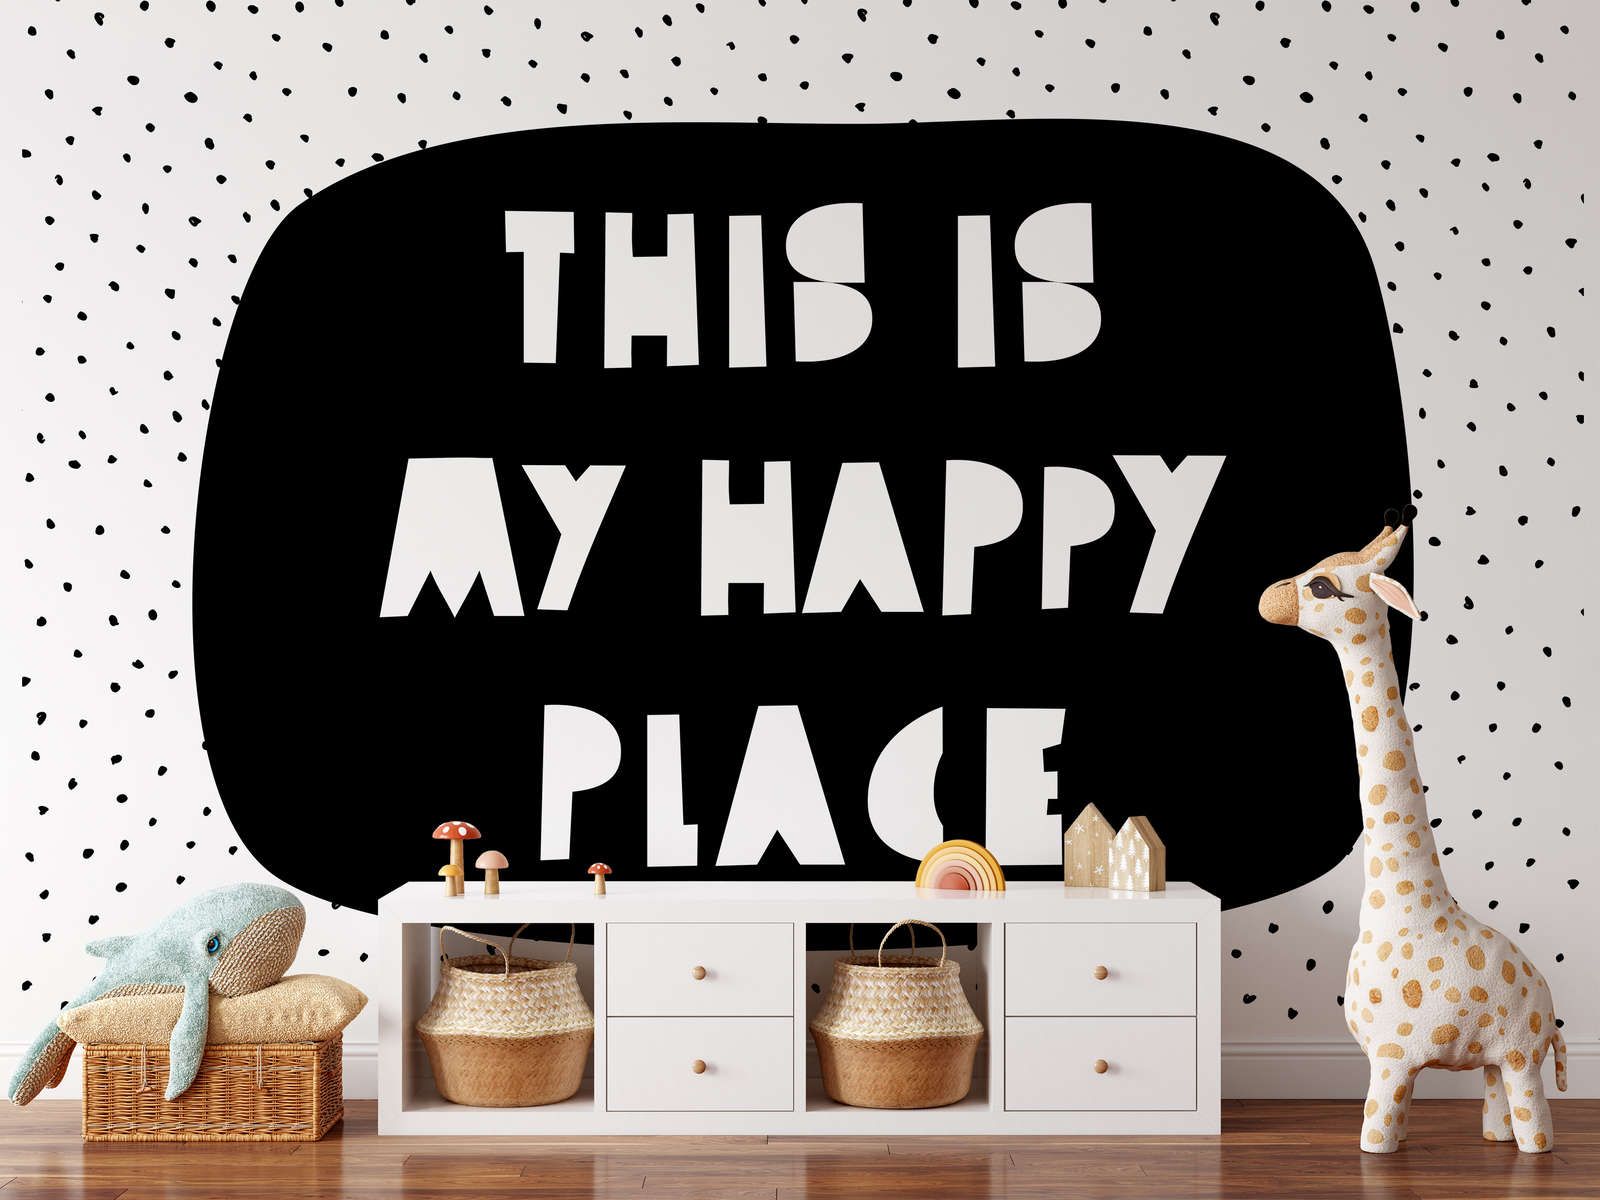             Photo wallpaper for children's room with lettering "This is my happy place" - Textured non-woven
        